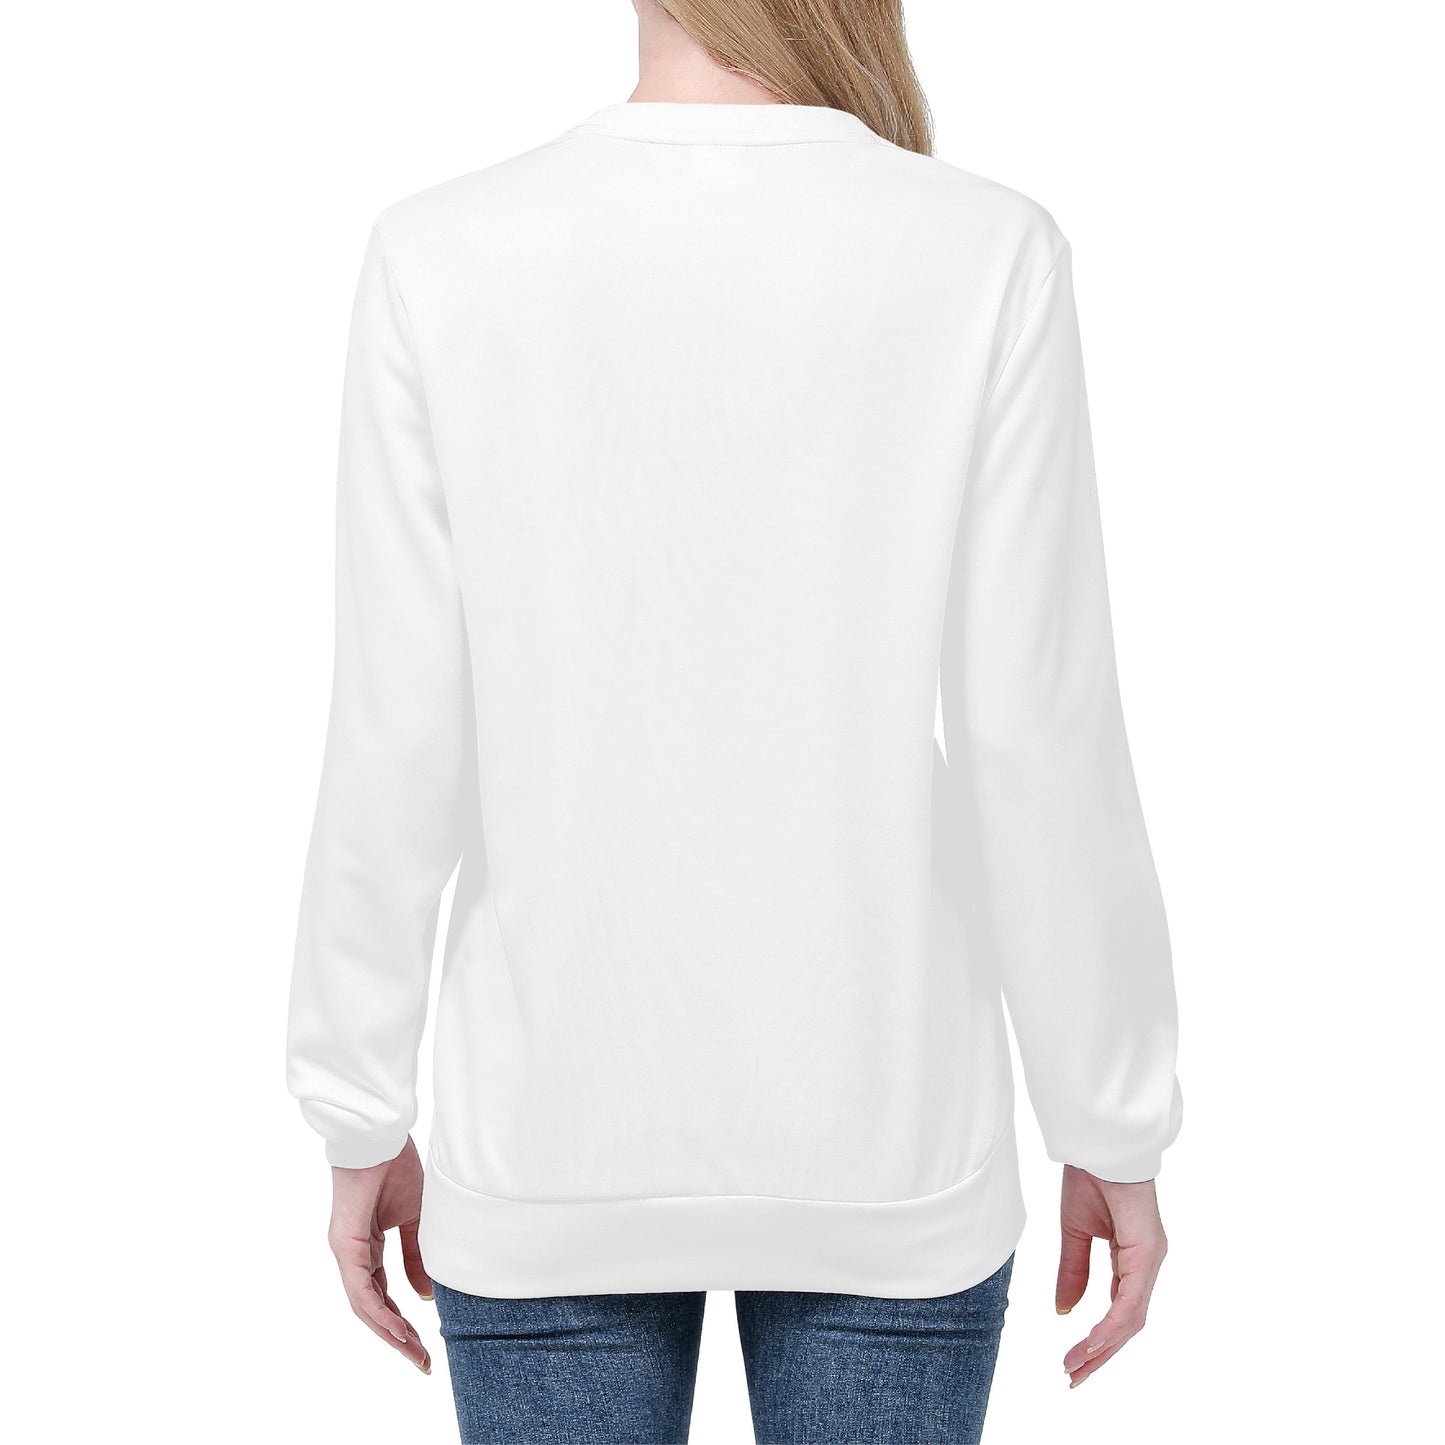 Create Your Own - Women's Fit All Over Print Sweatshirt